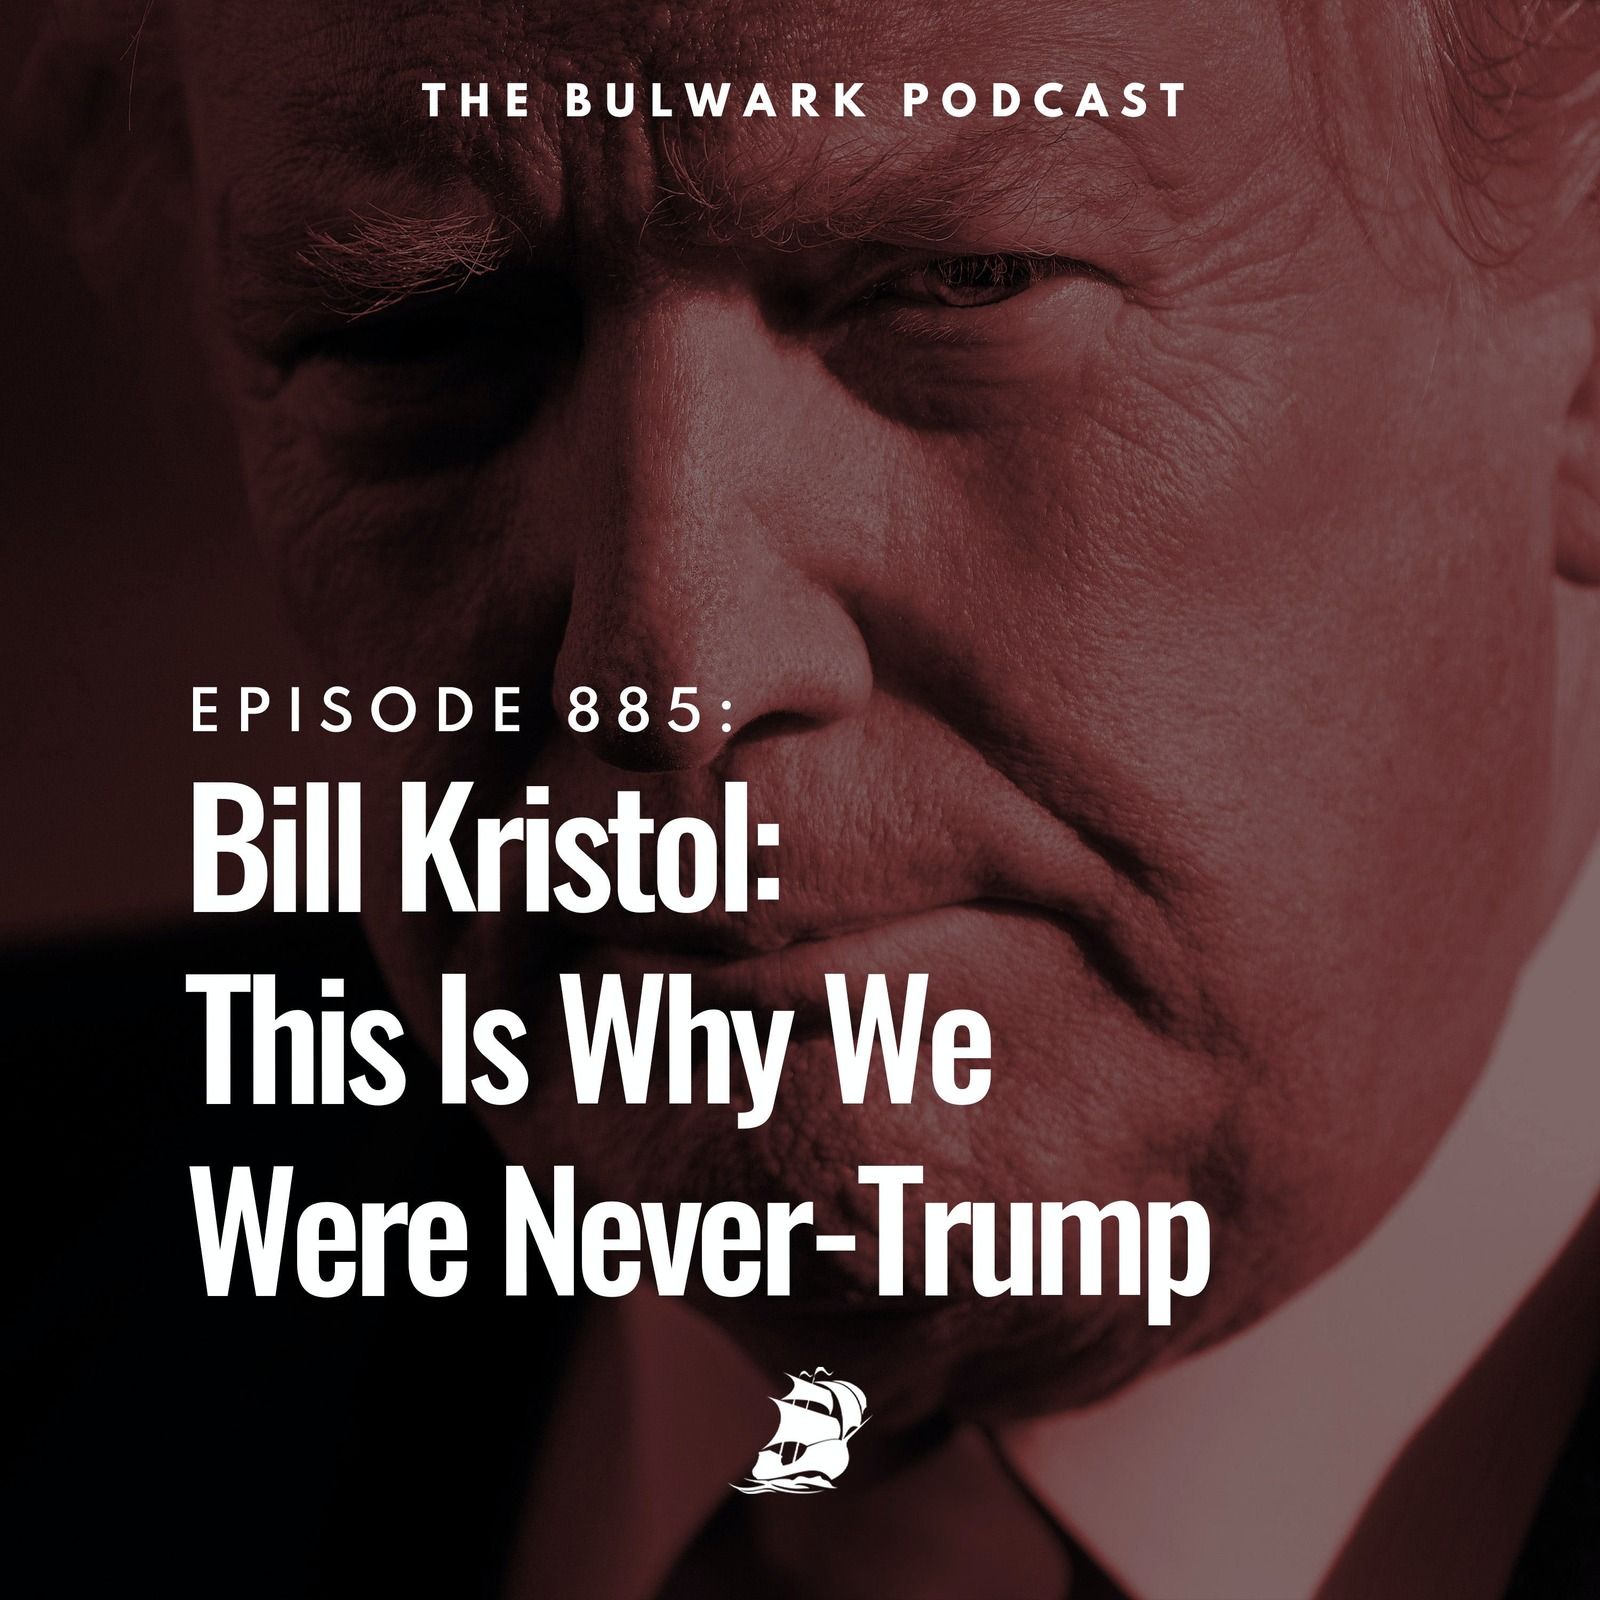 Bill Kristol: This Is Why We Were Never-Trump by The Bulwark Podcast